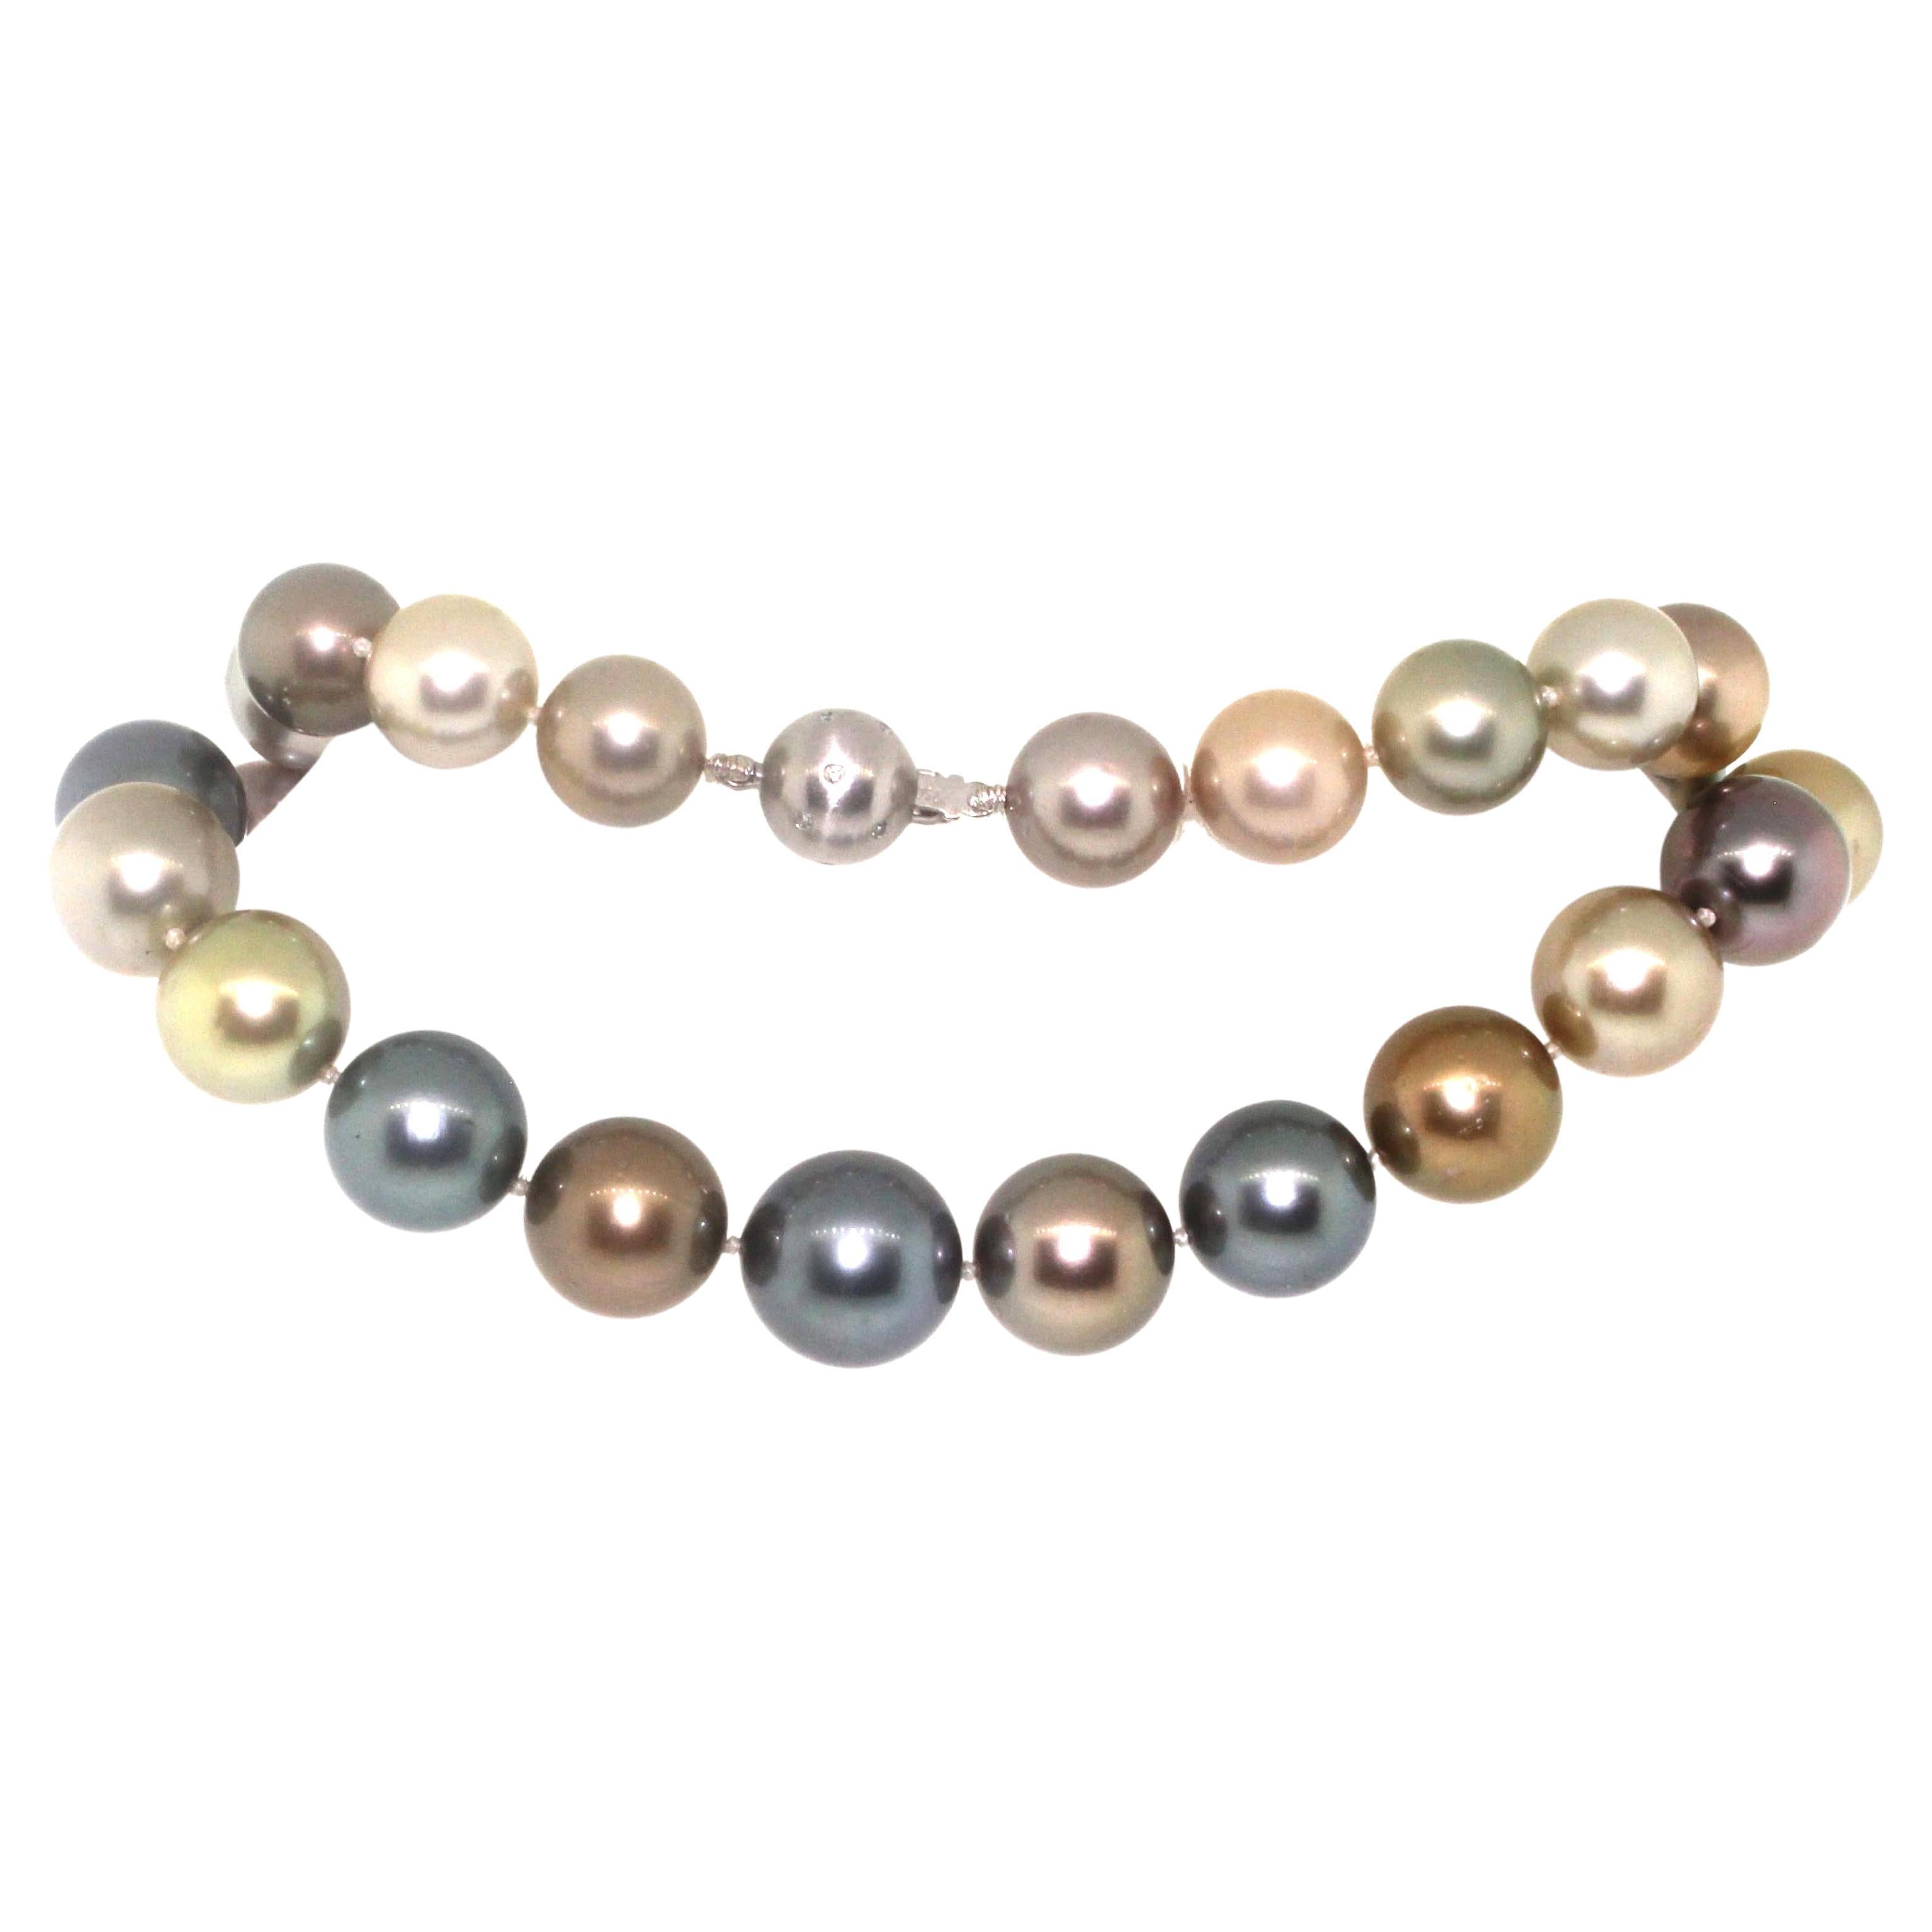 Hakimoto By Jewel Of Ocean Rare Fancy Multi Color Tahitian South Sea  Pearl
18K White Gold with Diamonds Clasp
11x13.8mm 20